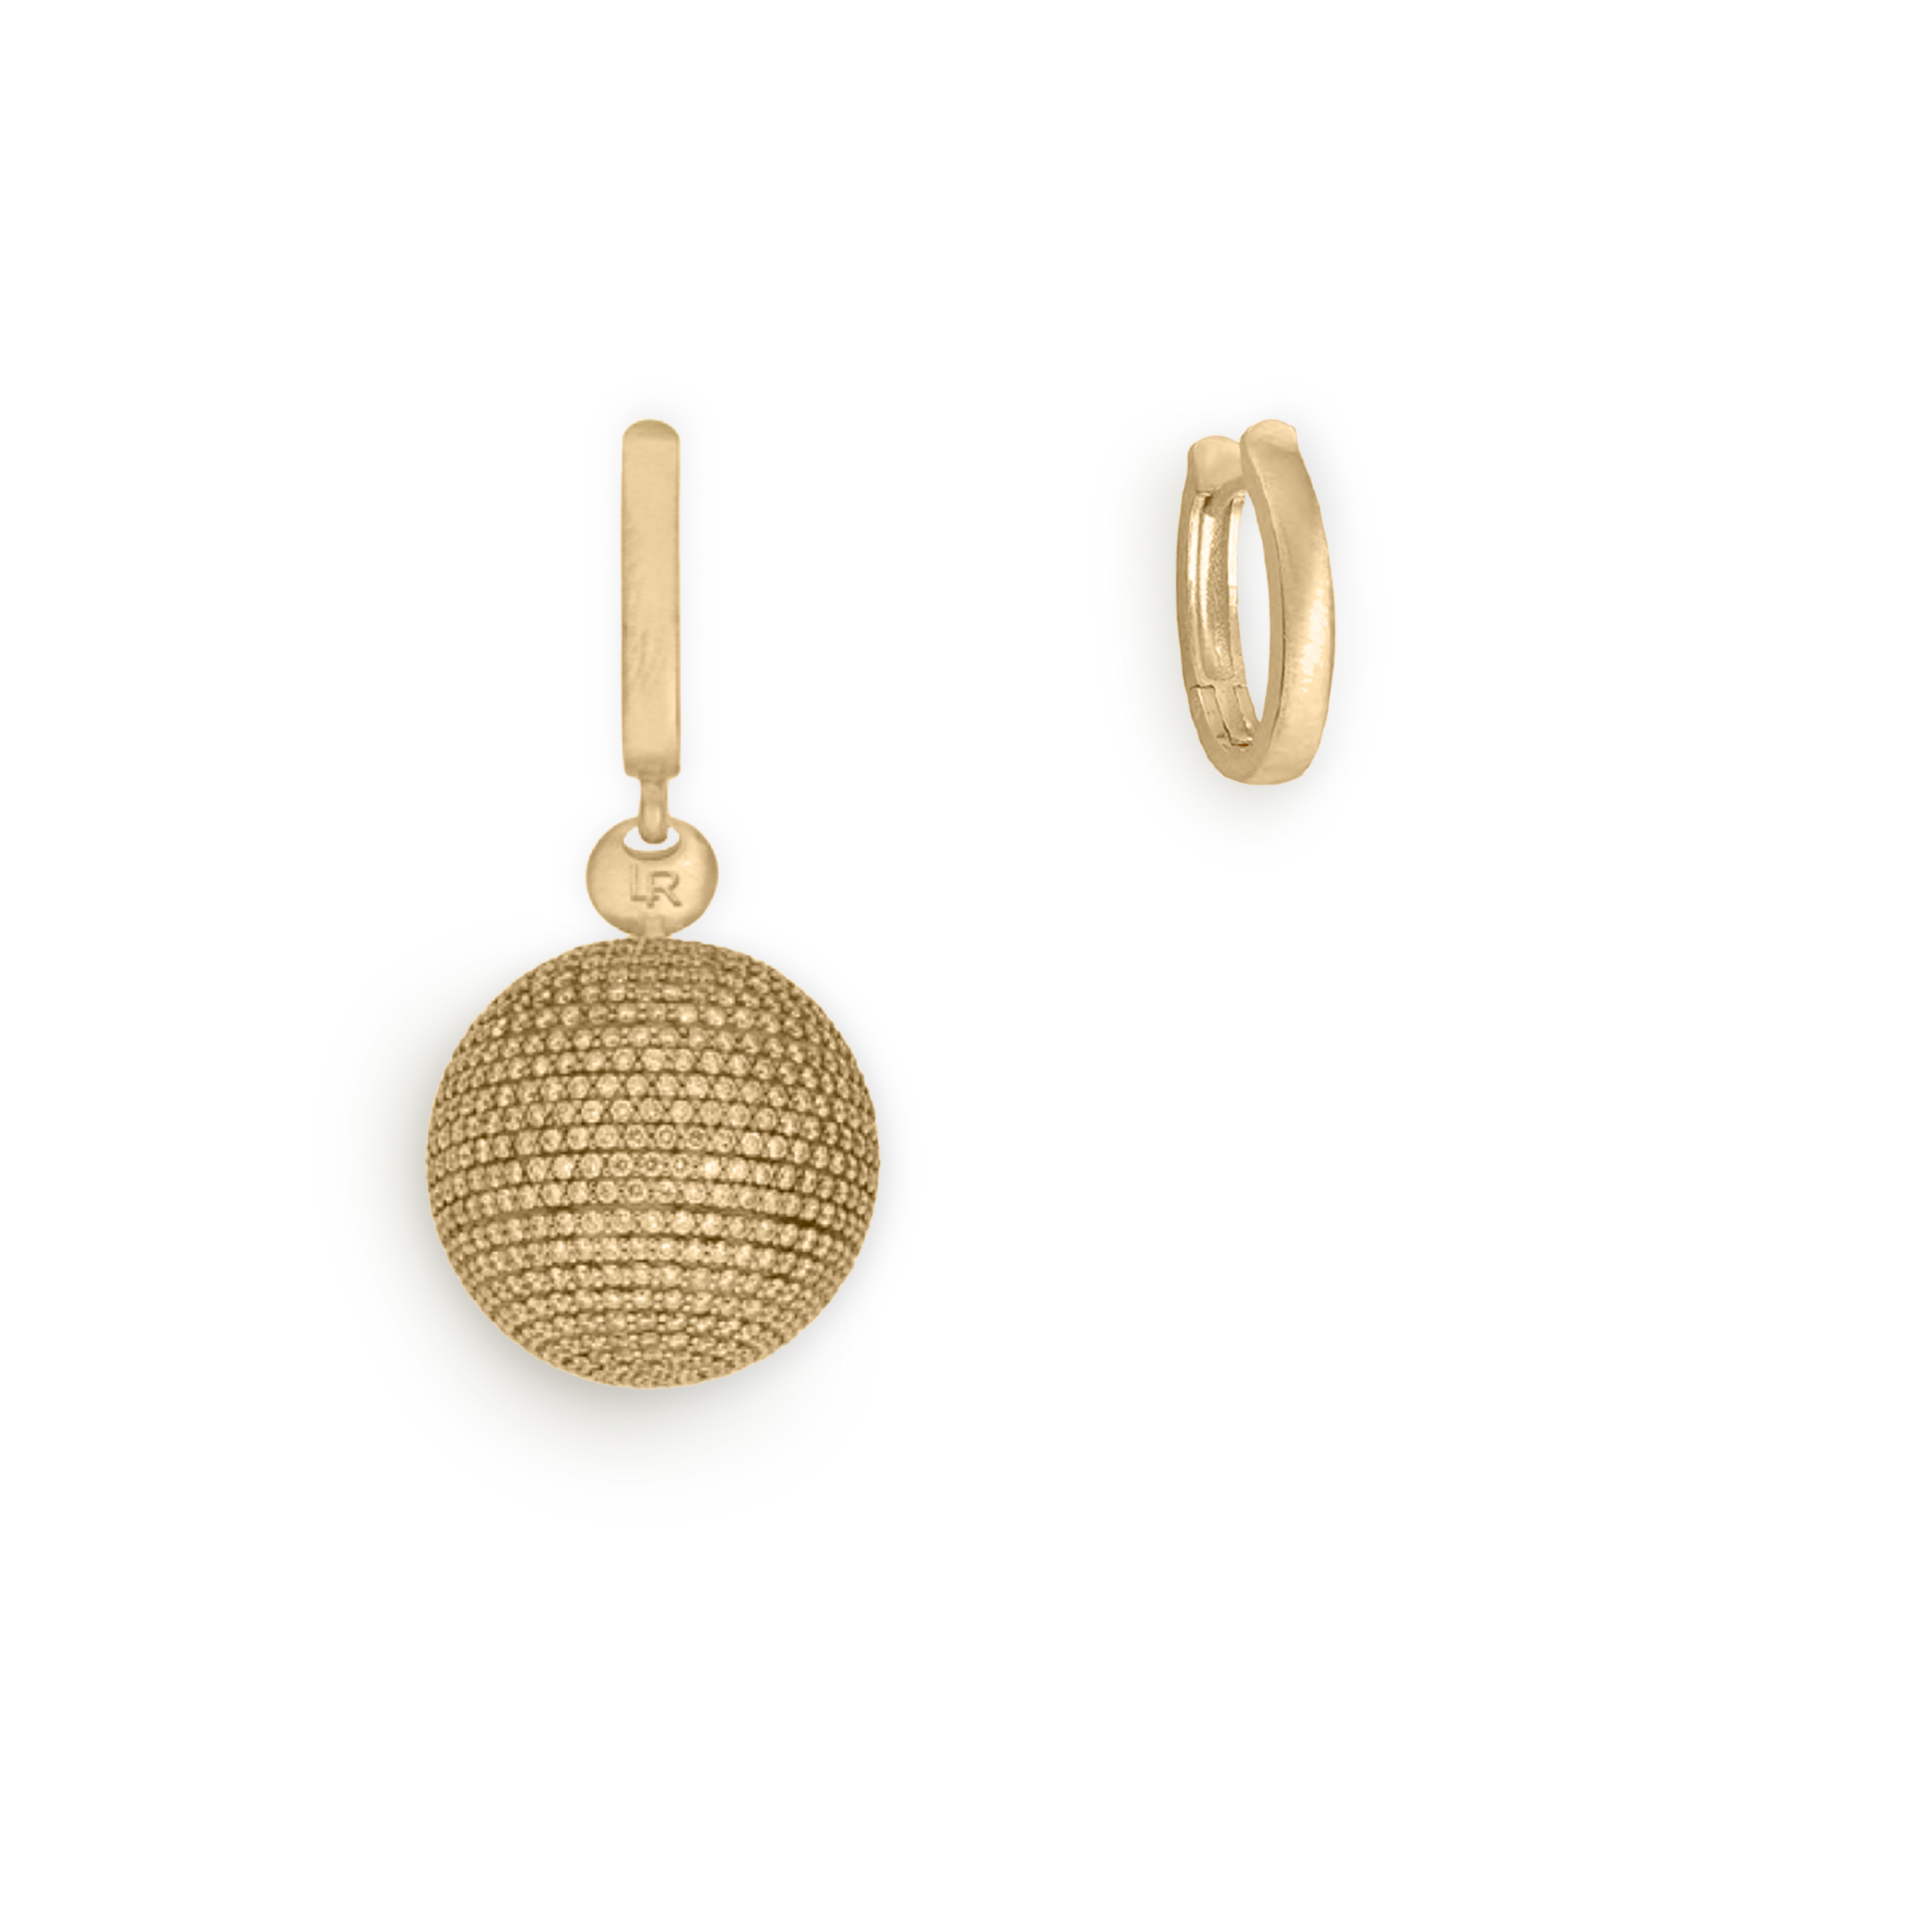 Marella Set of Earrings in Brushed Yellow Gold, one Sphere covered in Yellow Diamonds and one Oval Hoop